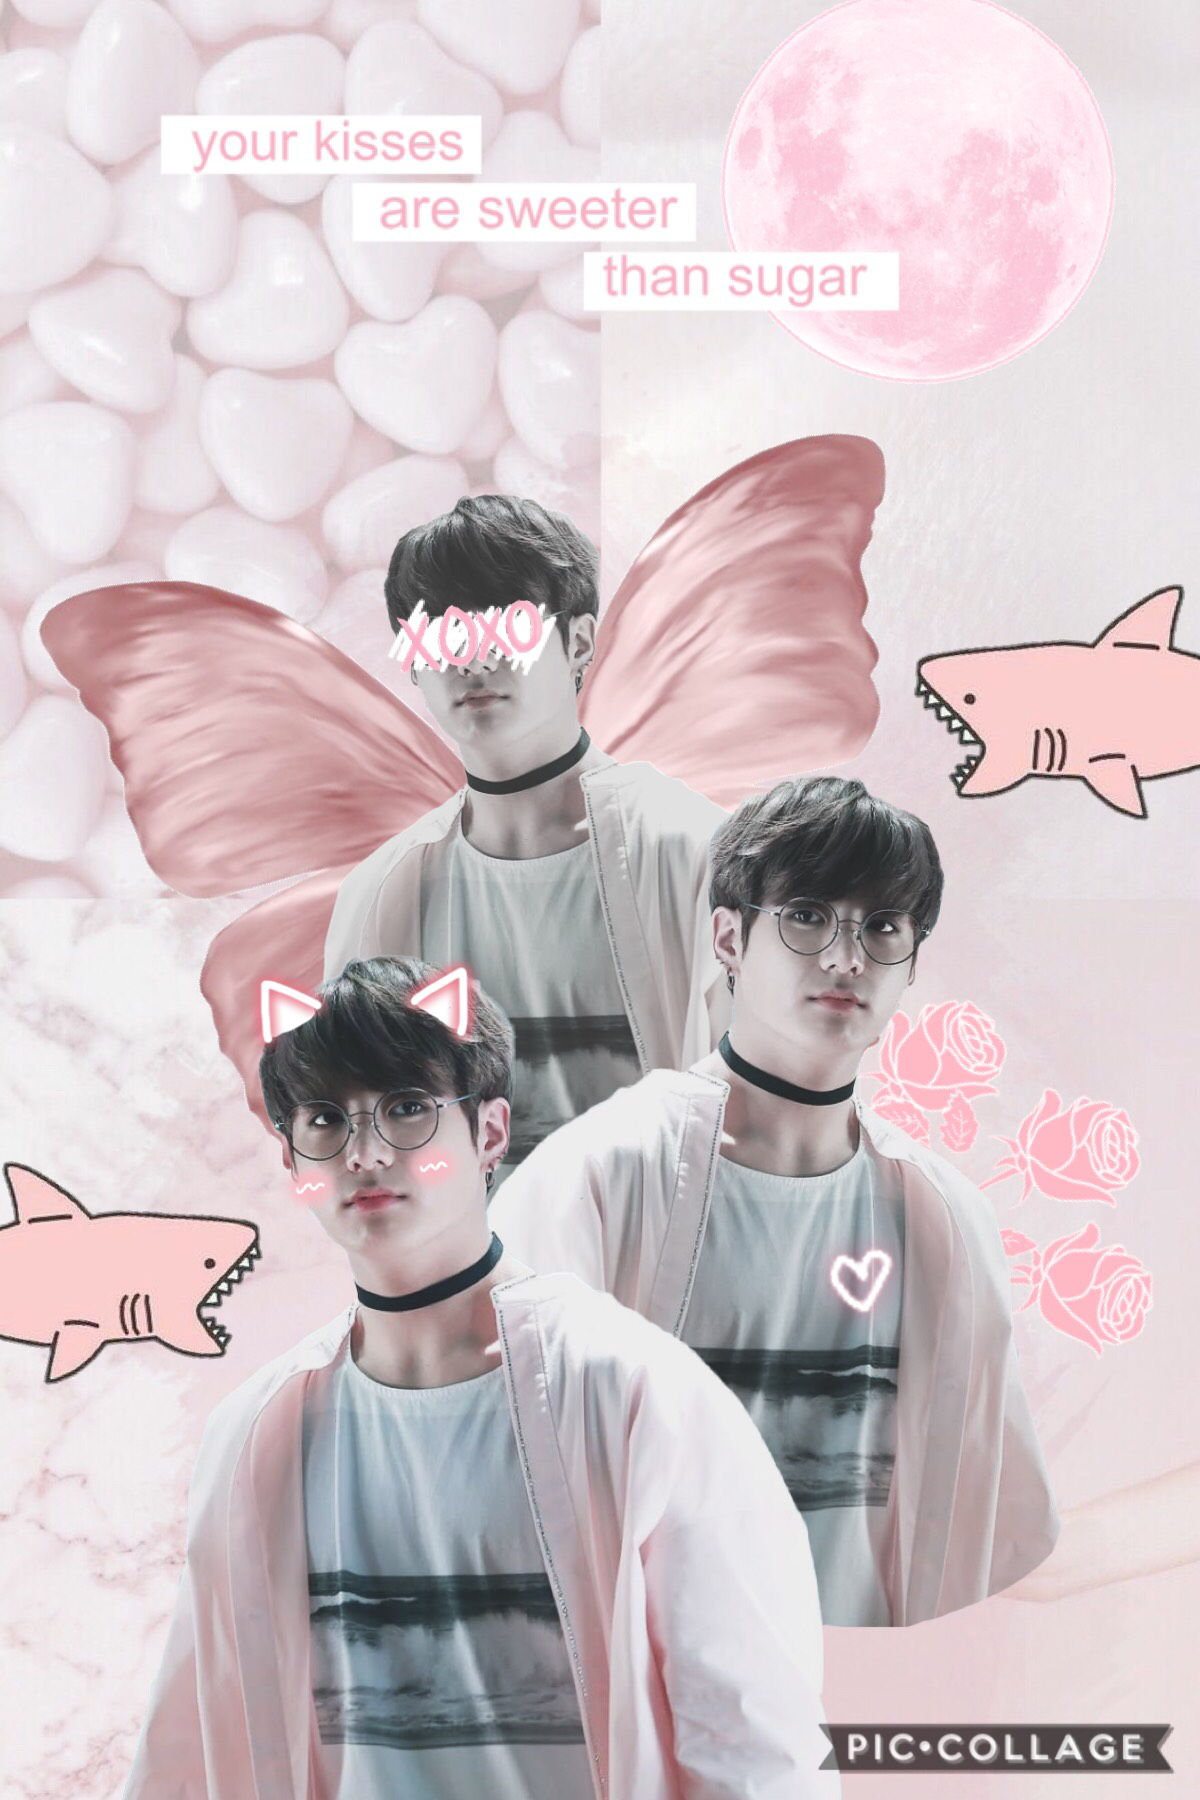 💕Tap💕

@-euphoria you inspired me to make a jk collage so this is dedicated to you

butterfly wings inspired by @jUsT-peachy 💜

the sharks would be my reaction if I saw jk irl 😮

qotd: should I start doing a qotd?